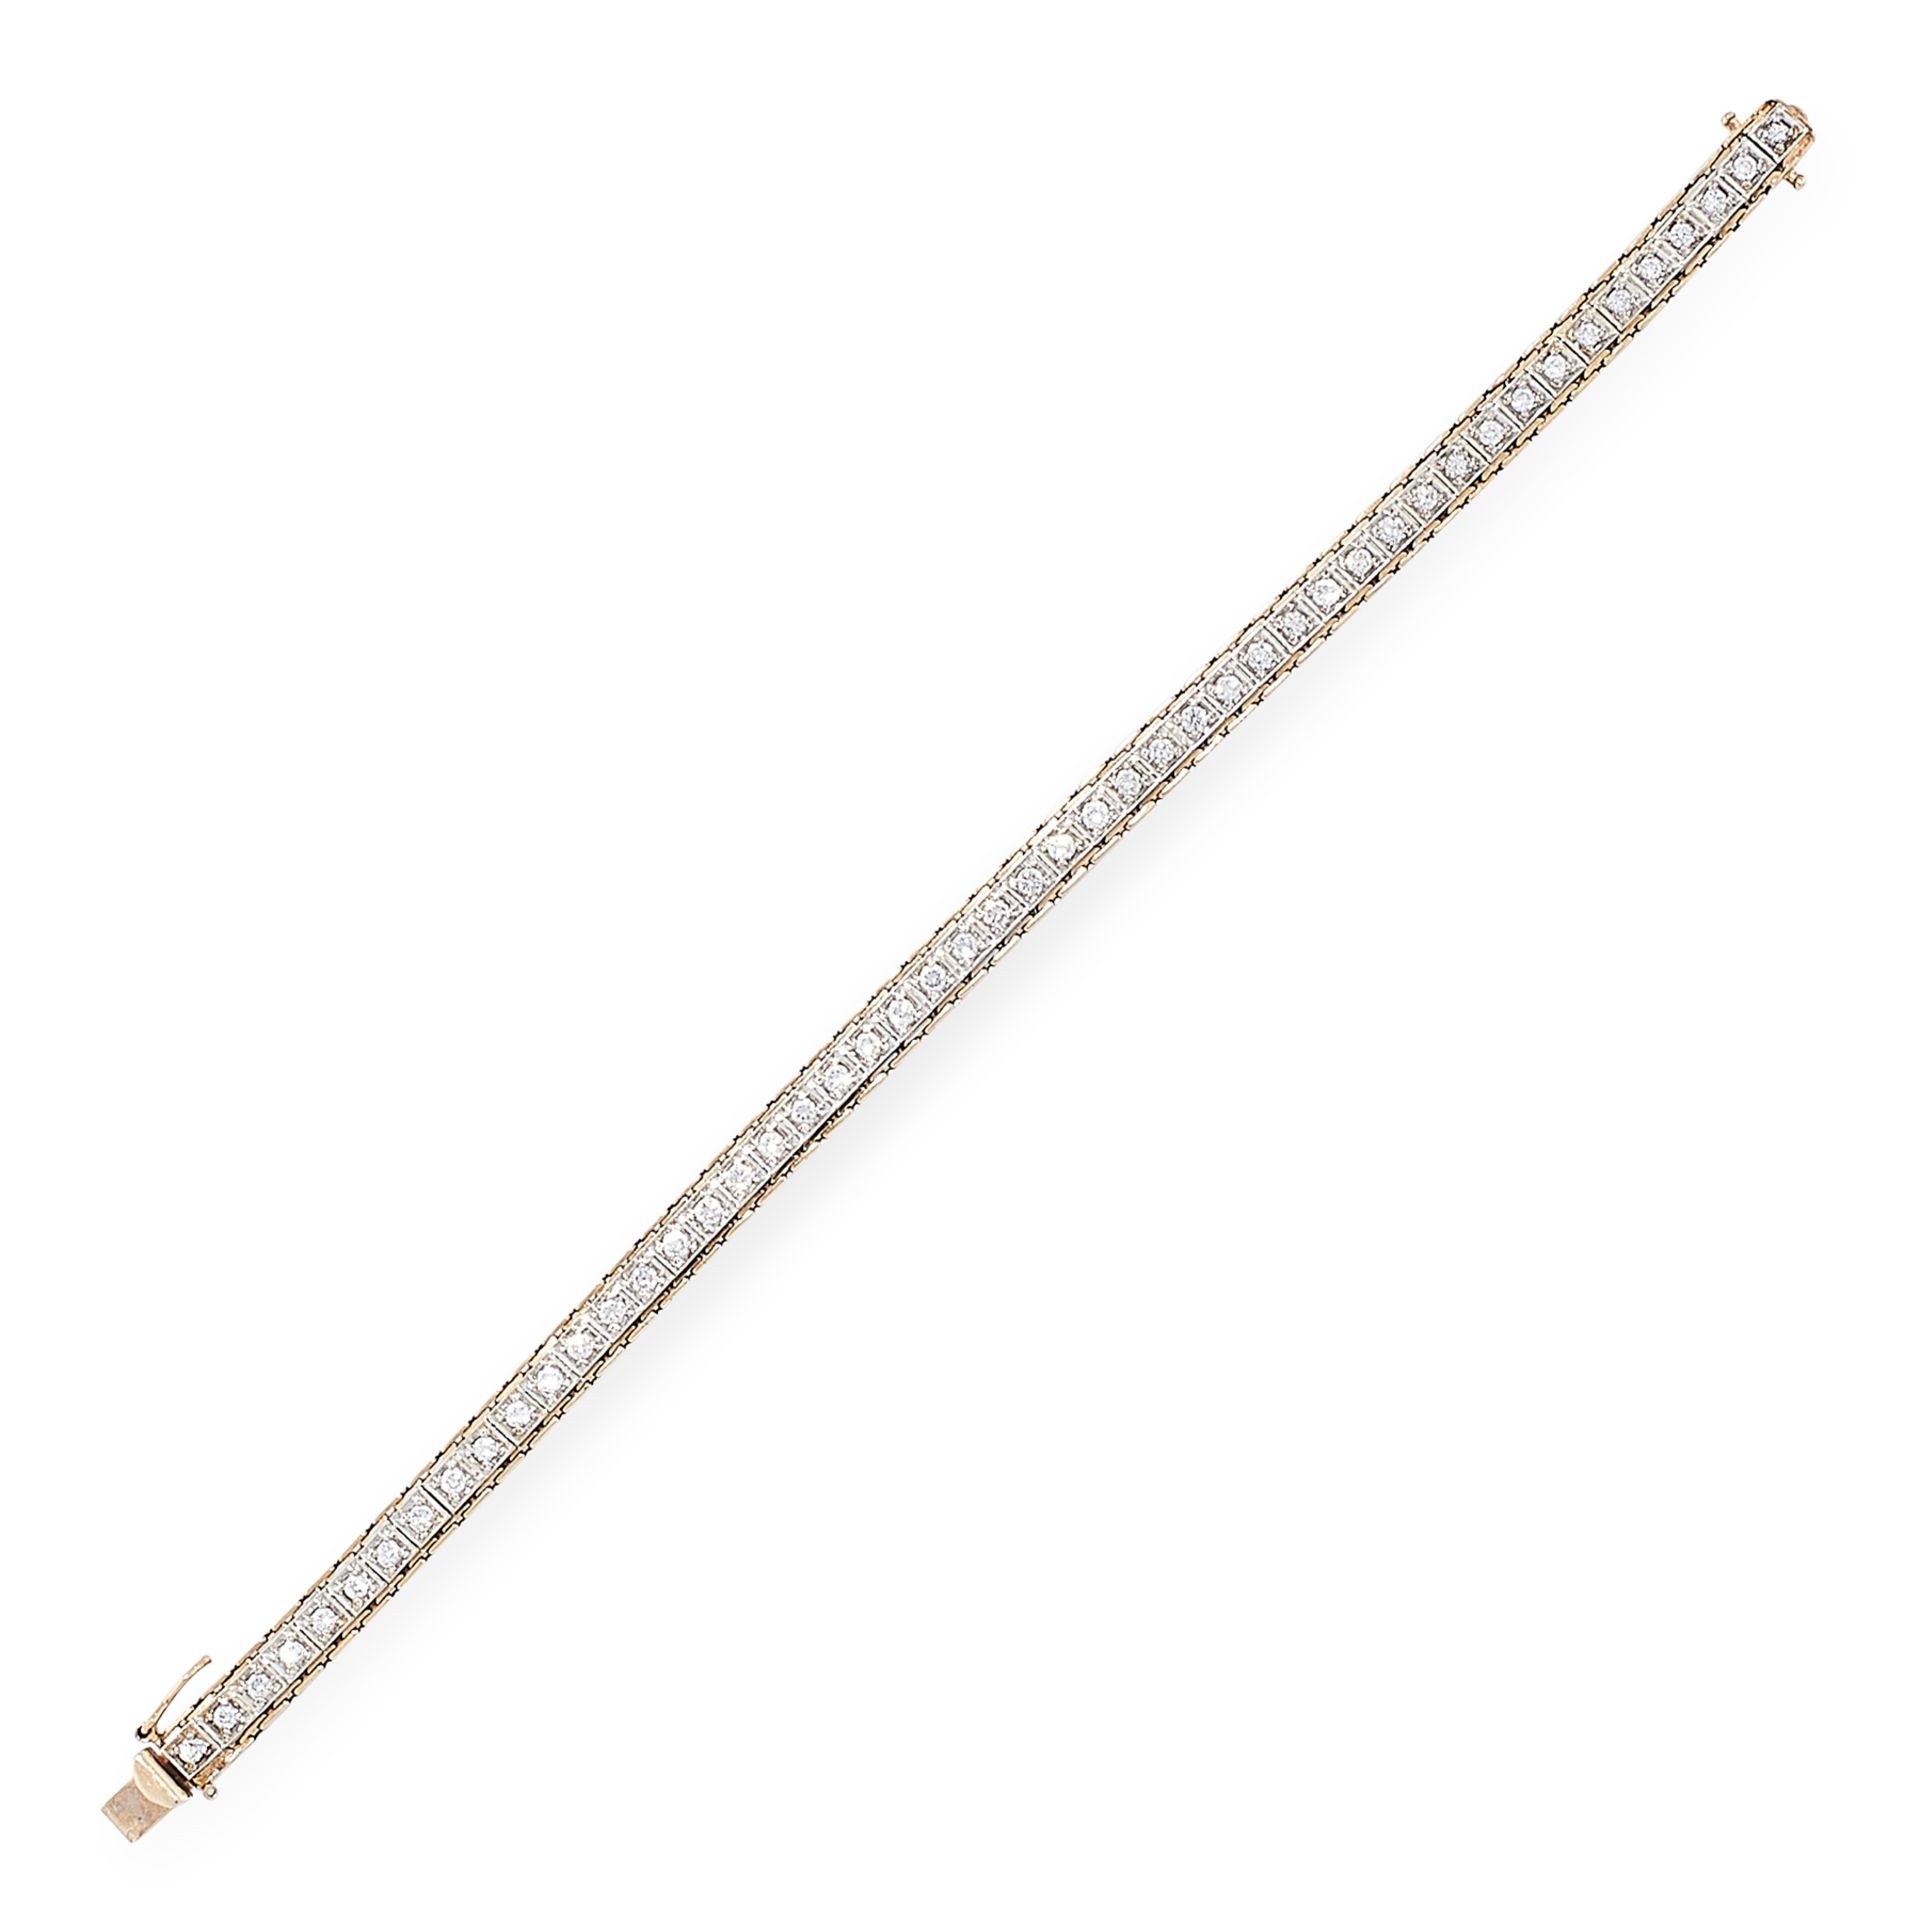 A VINTAGE DIAMOND LINE BRACELET in 14ct yellow and white gold, comprising a single row of round